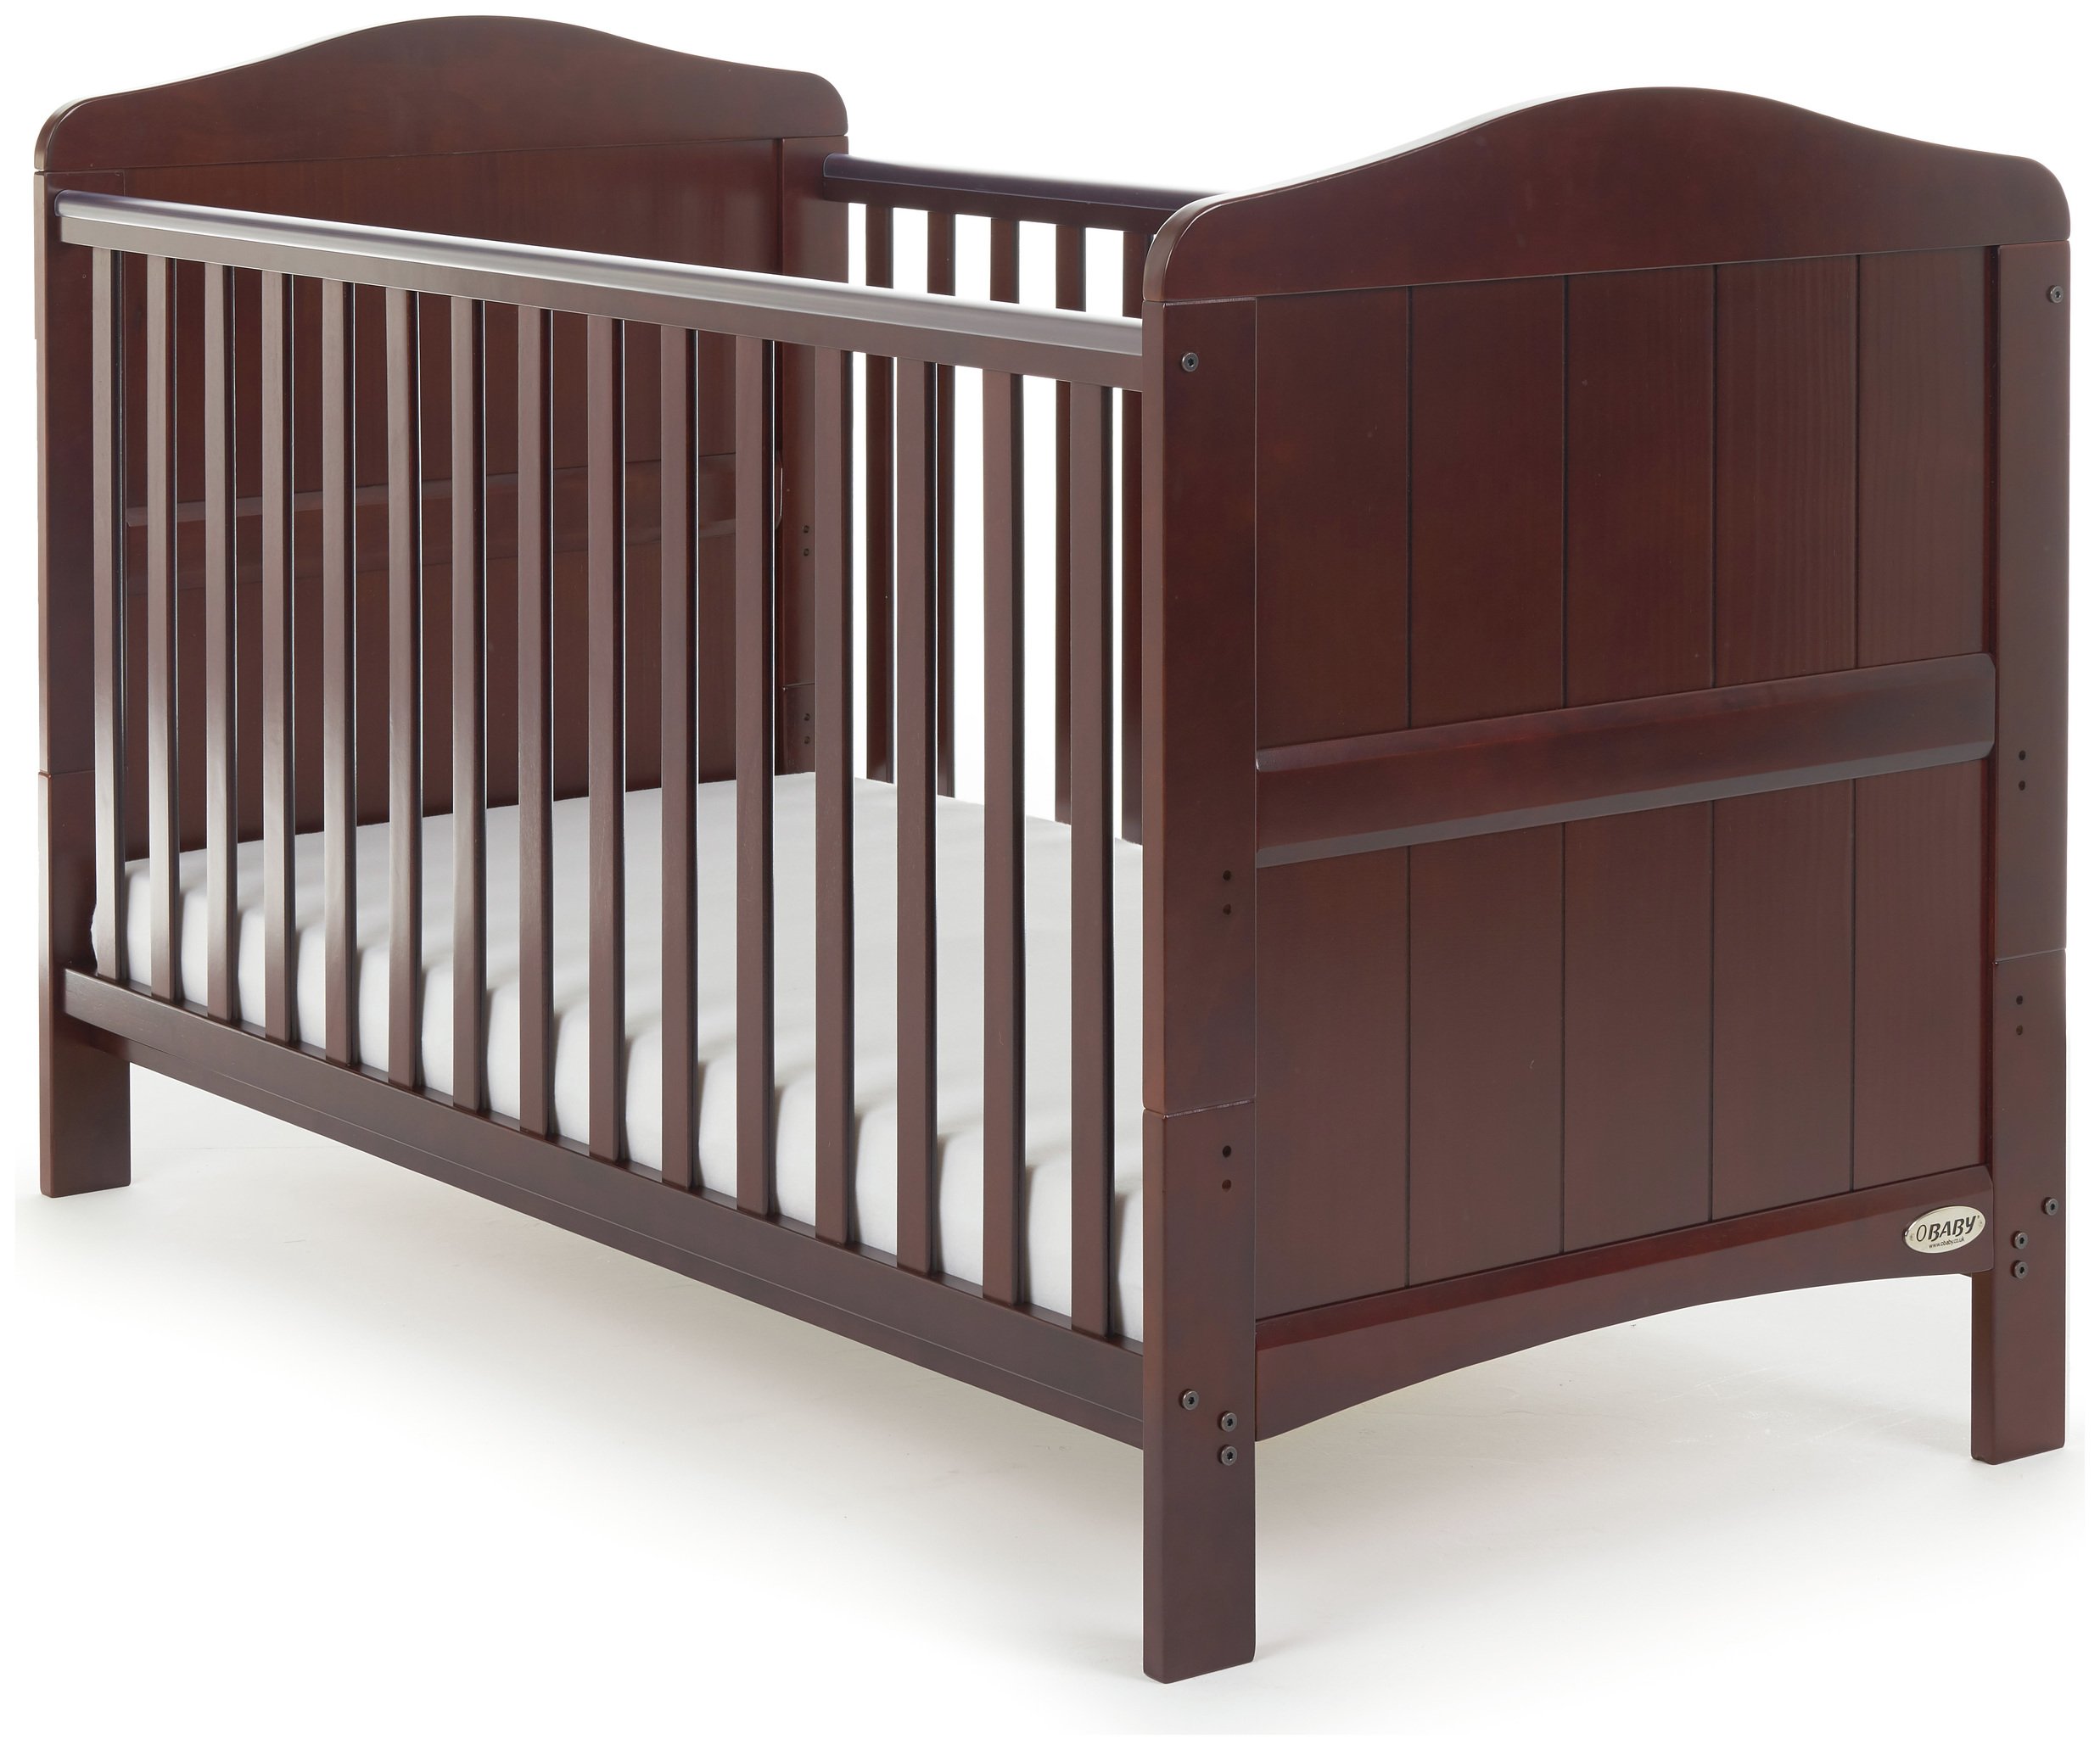 Obaby Whitby Cot Bed - Walnut